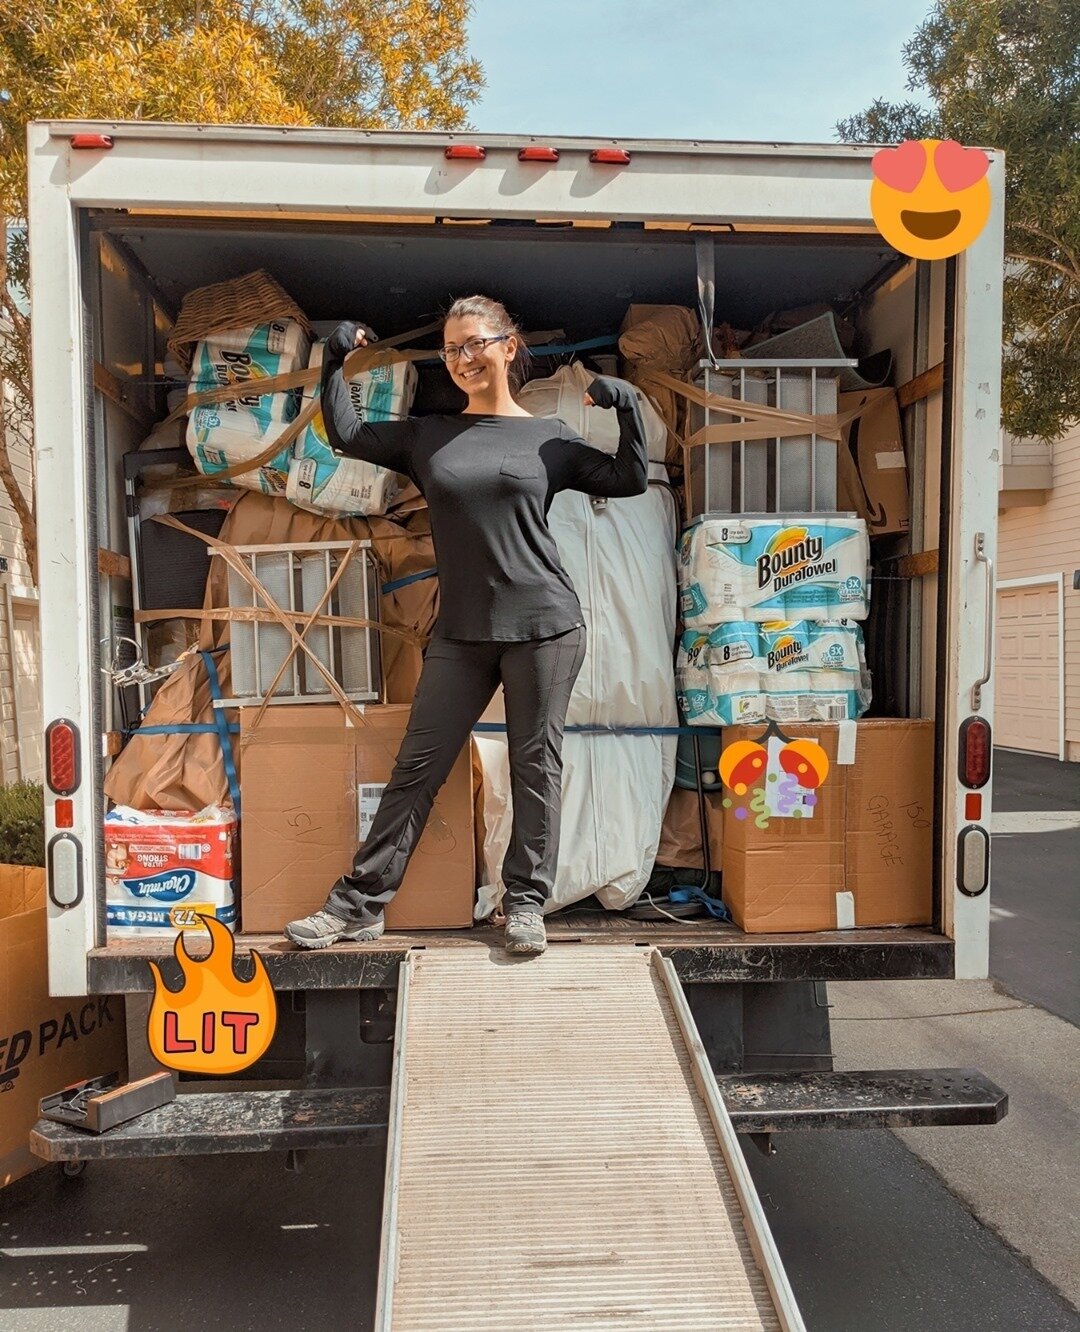 One year ago I was packing up a moving van to head to Denver, Colorado! We started packing a couple of months prior, used the konmari method to really cut back on what we packed, got ourselves a u-haul and hired a couple of dudes to pack the truck fo